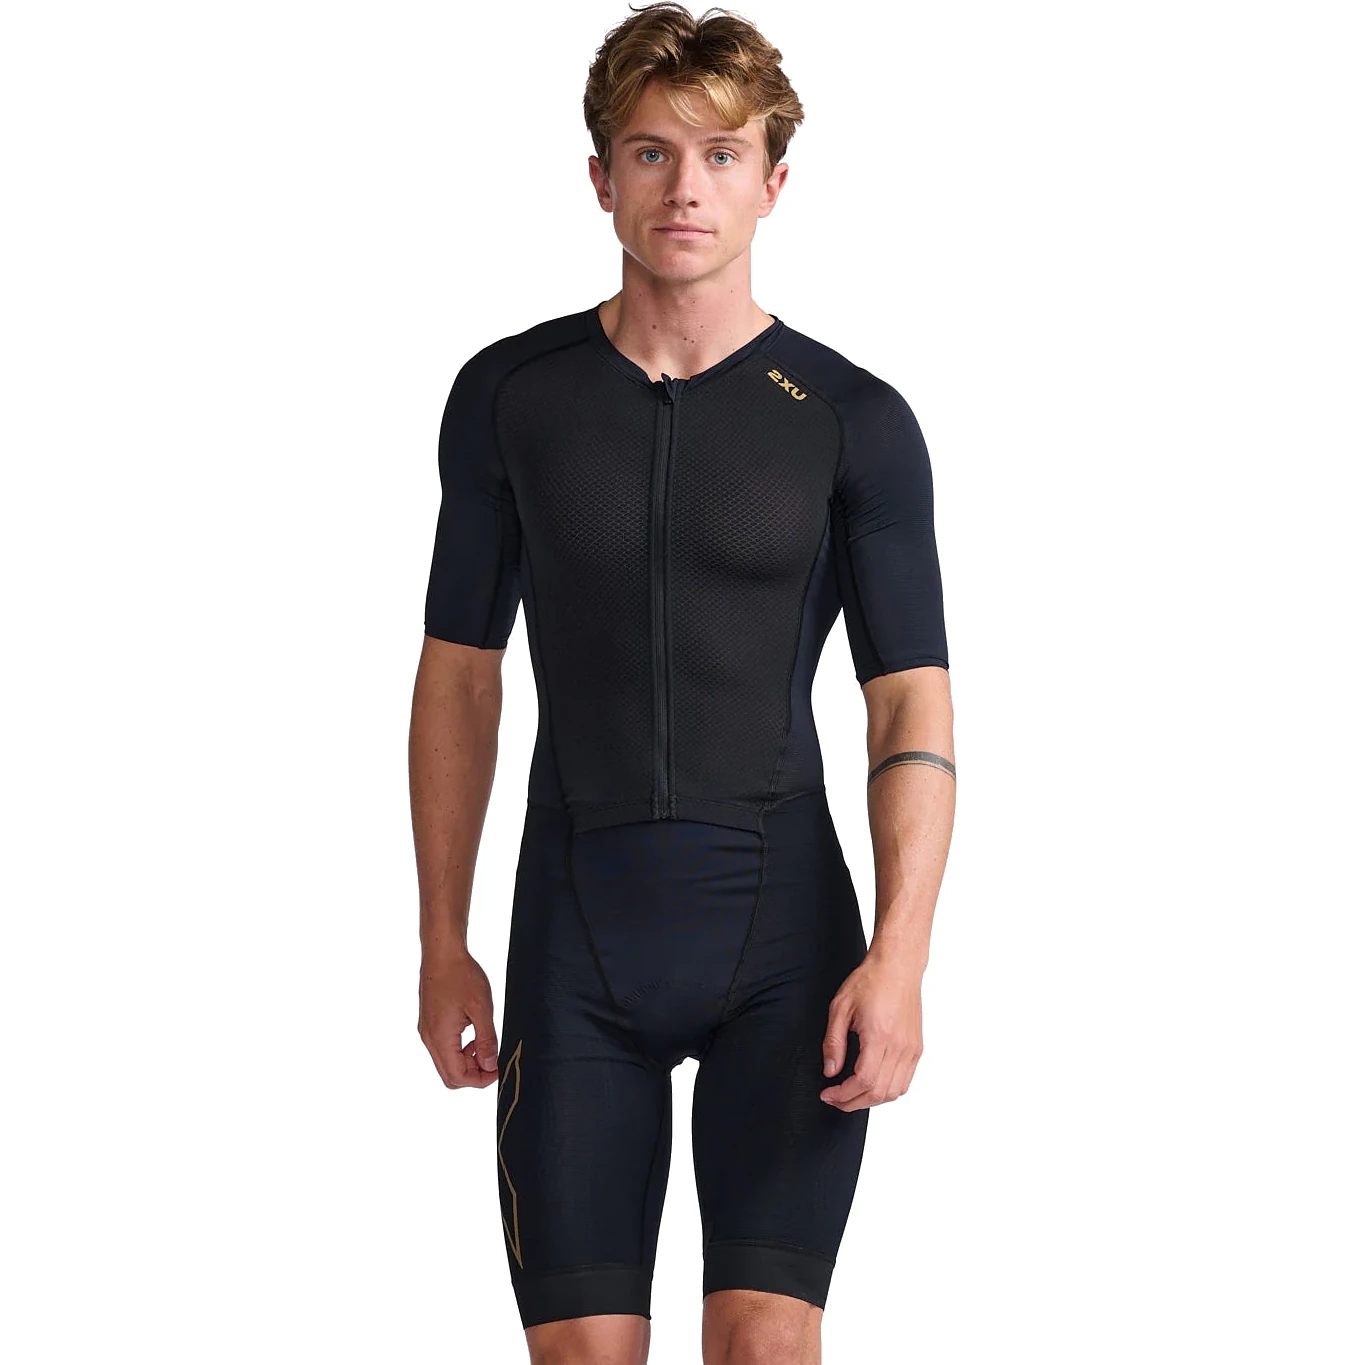 Picture of 2XU Light Speed Sleeved Trisuit - black/gold